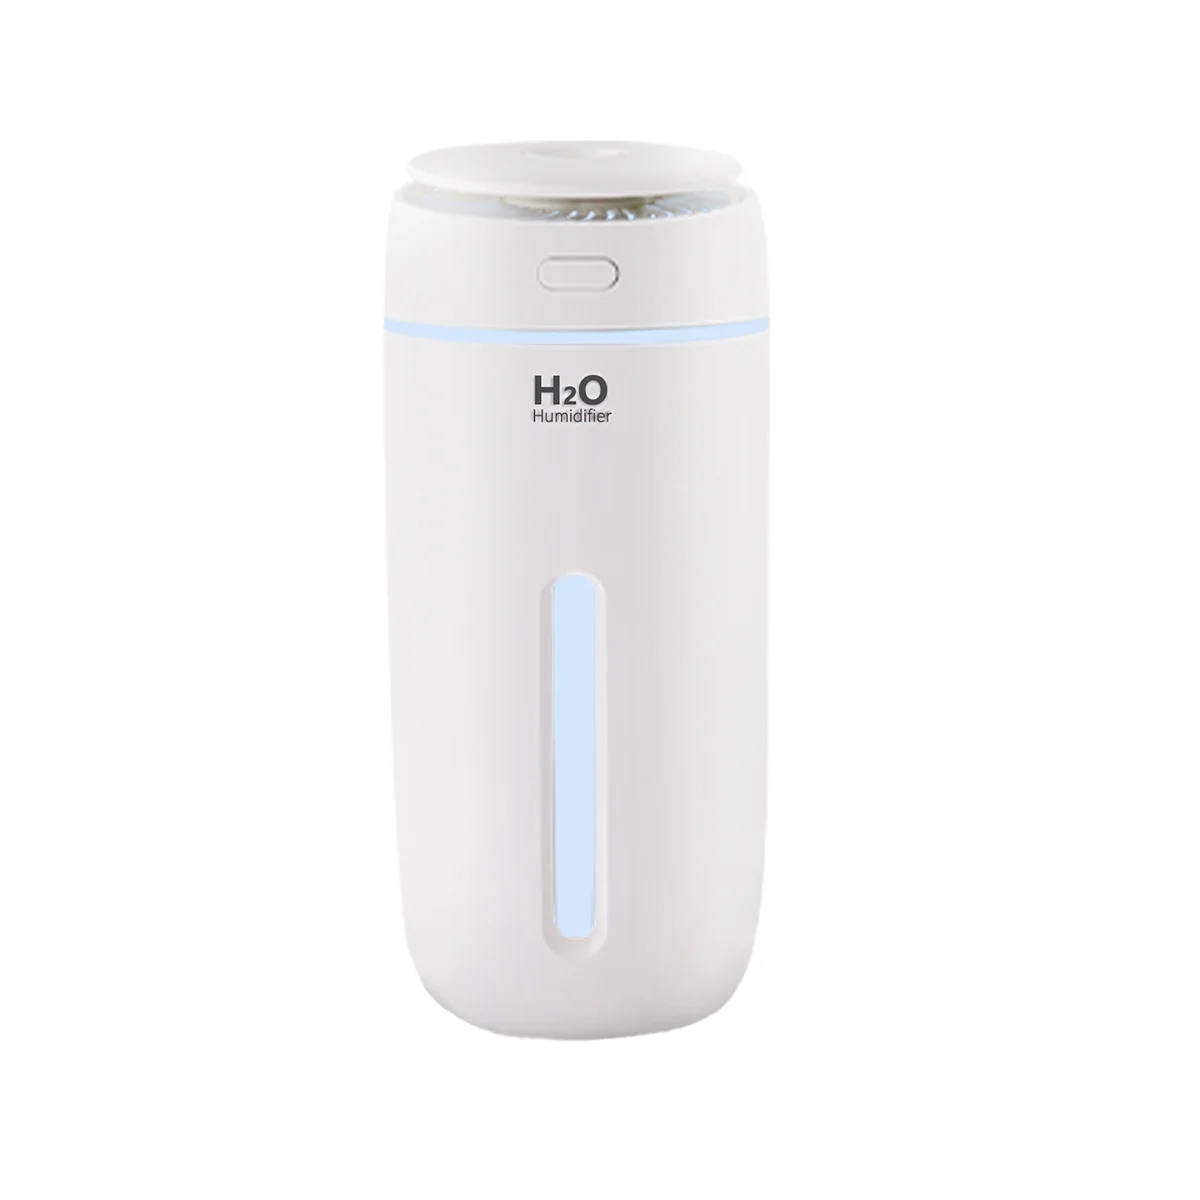 

Car Mini Humidifier Home 400Ml Small Cool Mist Air Humidifier with 7 Color LED Night Light, Whisper USB Humidifiers,A